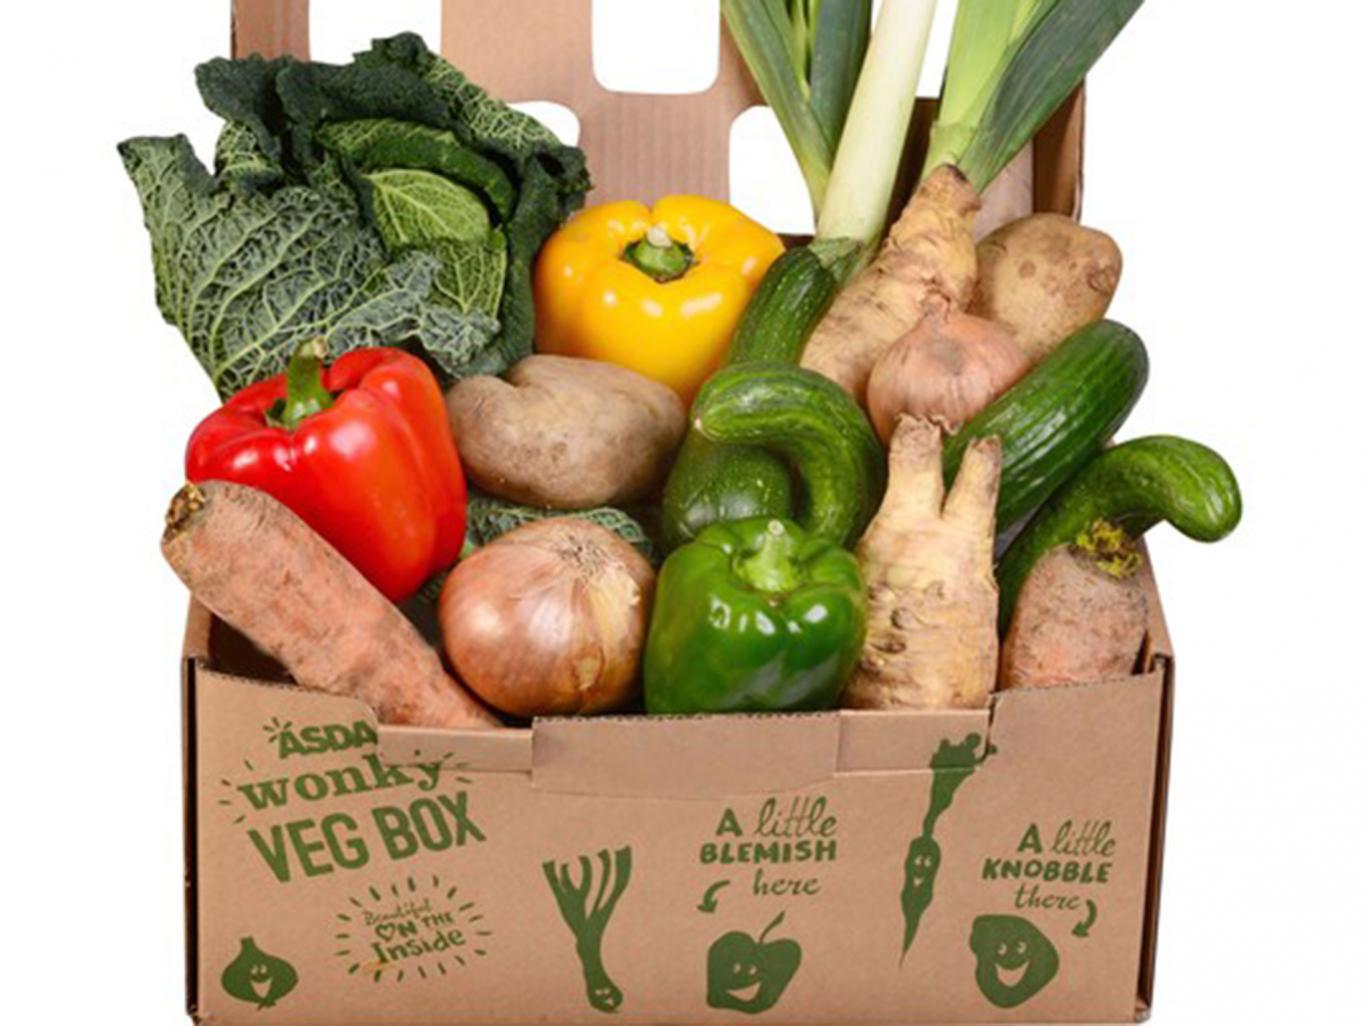 sda's wonky vegetable box contains vegetables which are misshapen, have growth cracks, or are a different size than average Asda